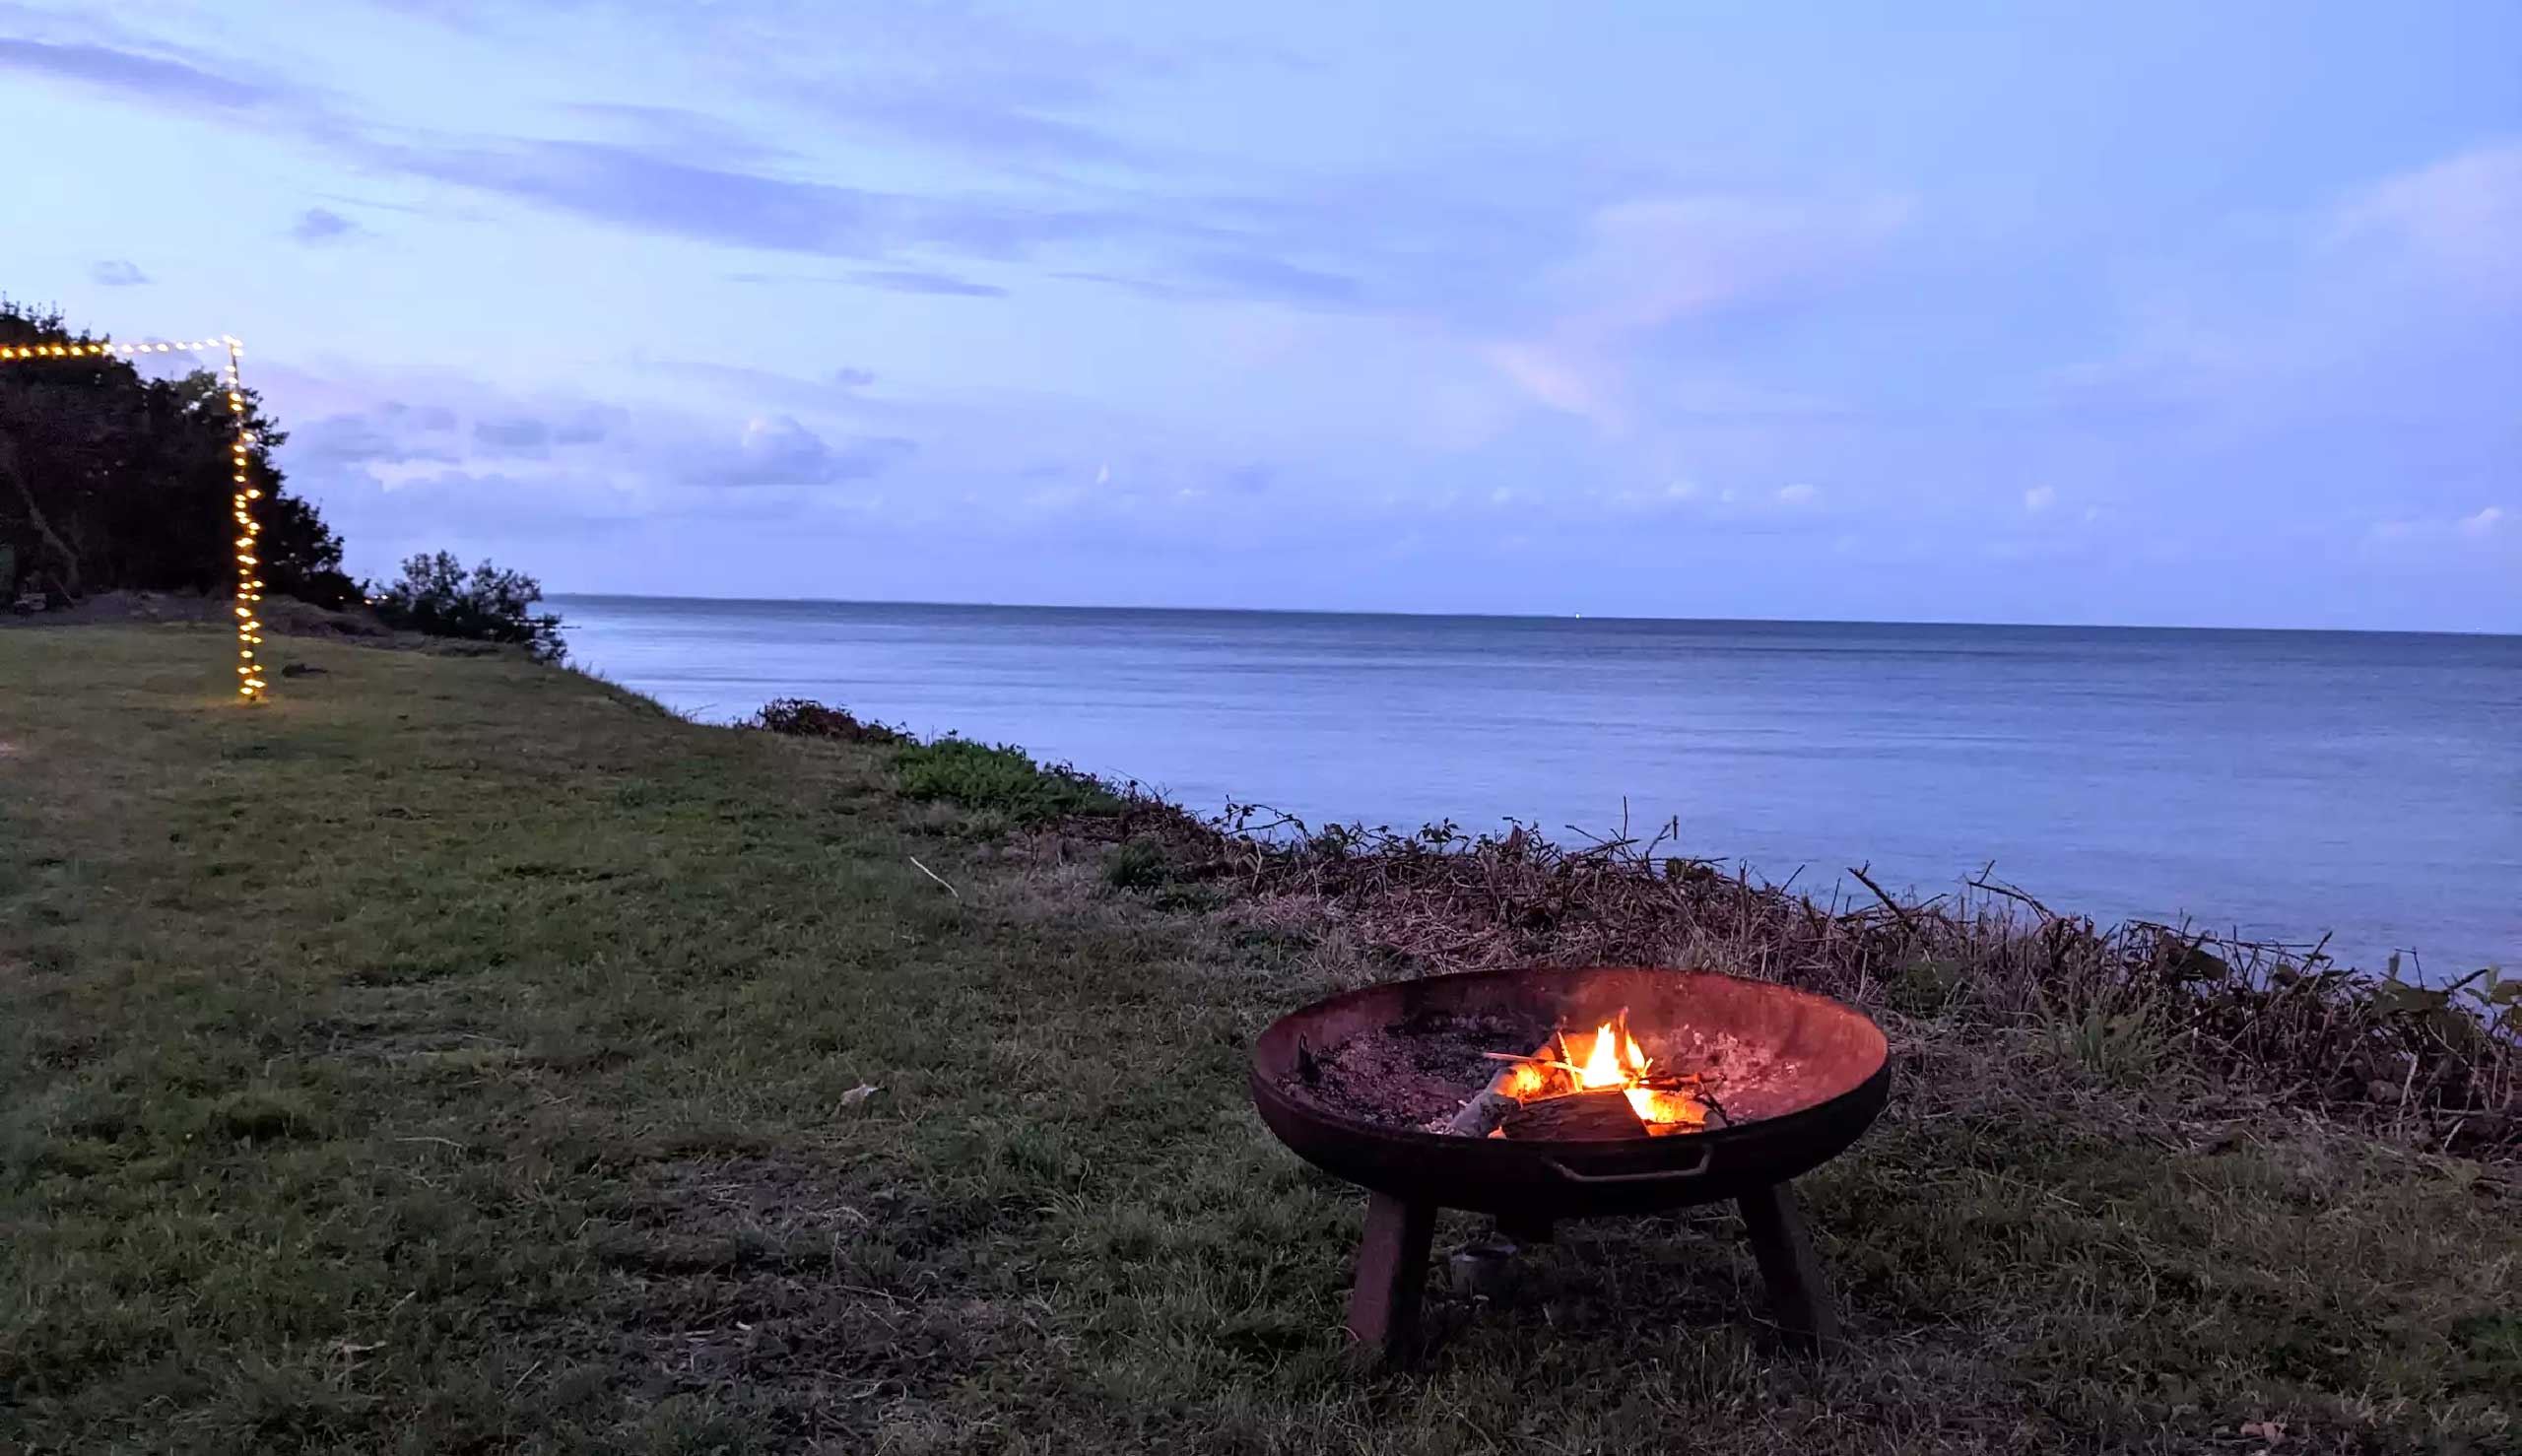 You can spend the evening comfortably with a fire bowl at the Baltic Sea coast of Dahme. Copyright: Oliver S.